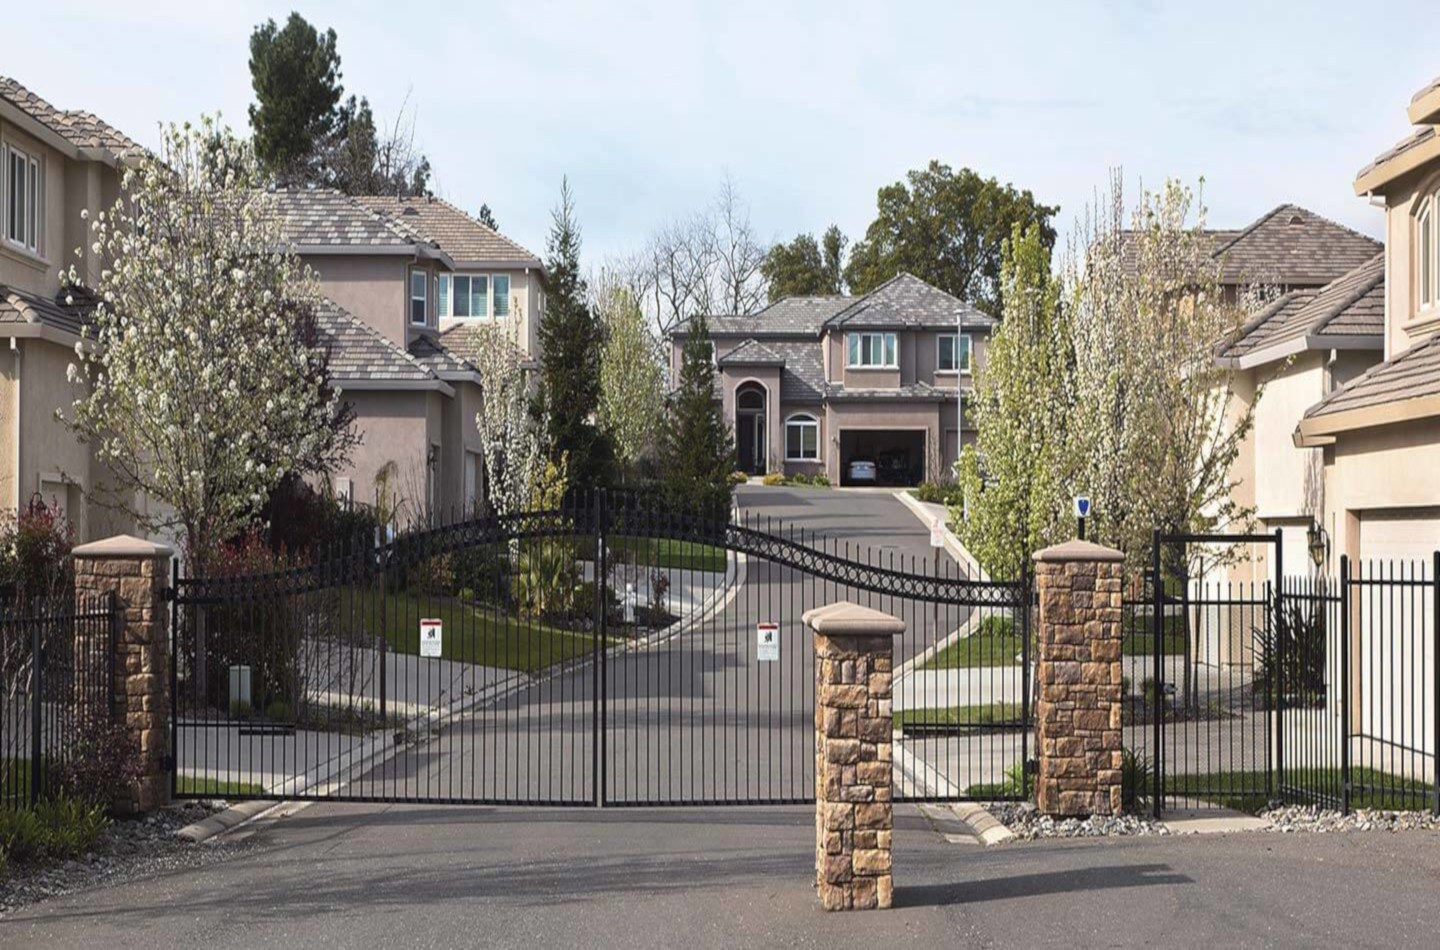 A residential neighborhood with a gated entrance.